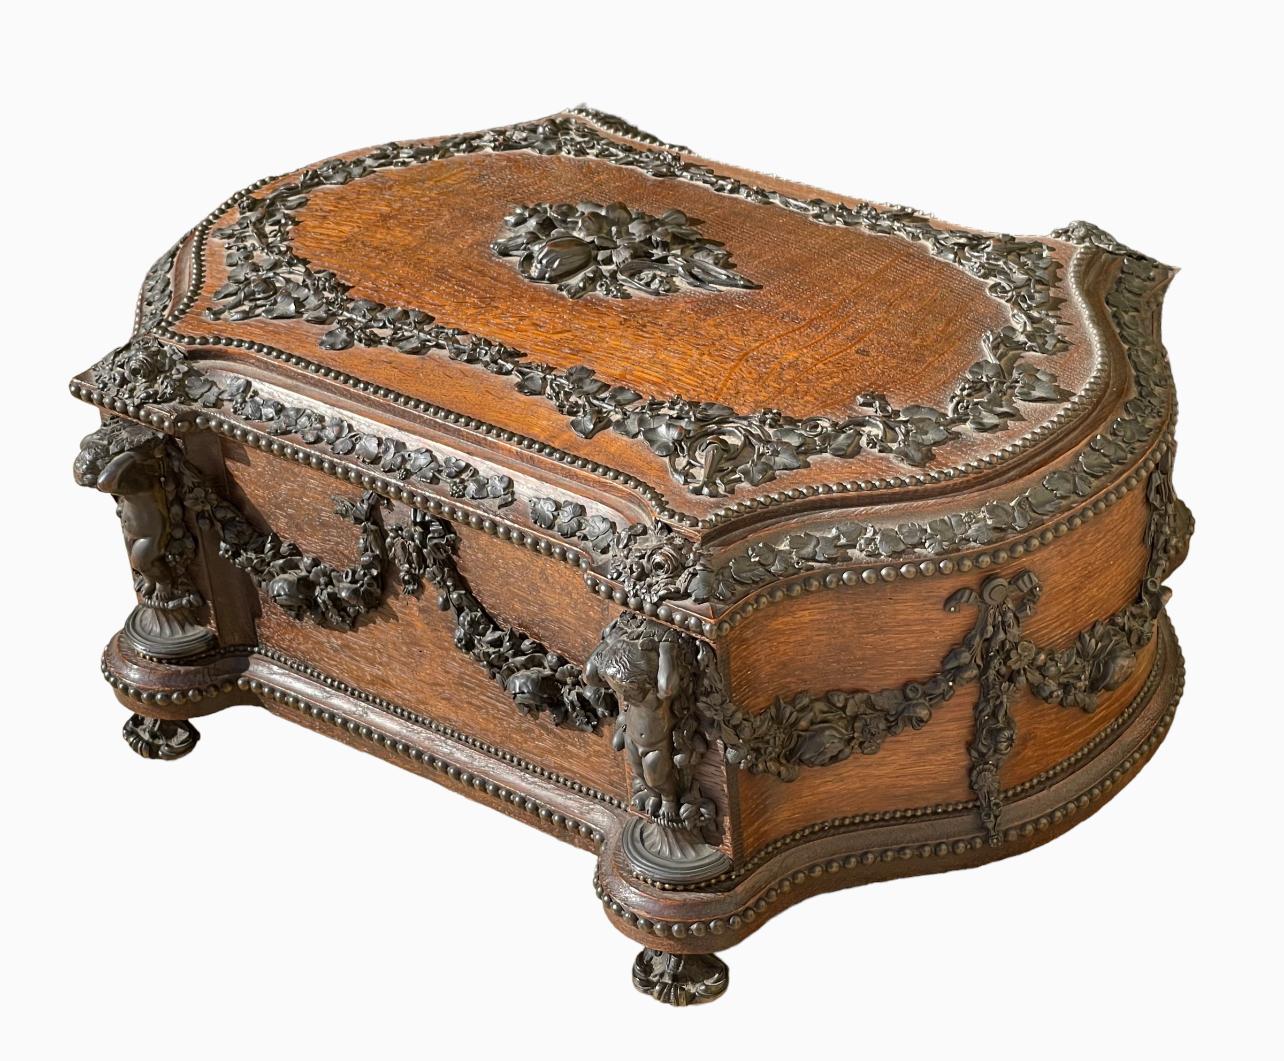 Large oak box carved on all sides richly decorated with garlands of flowers and bronze foliage. 4 bronze puttis adorn the 4 corners of this box. Signed on the lock 